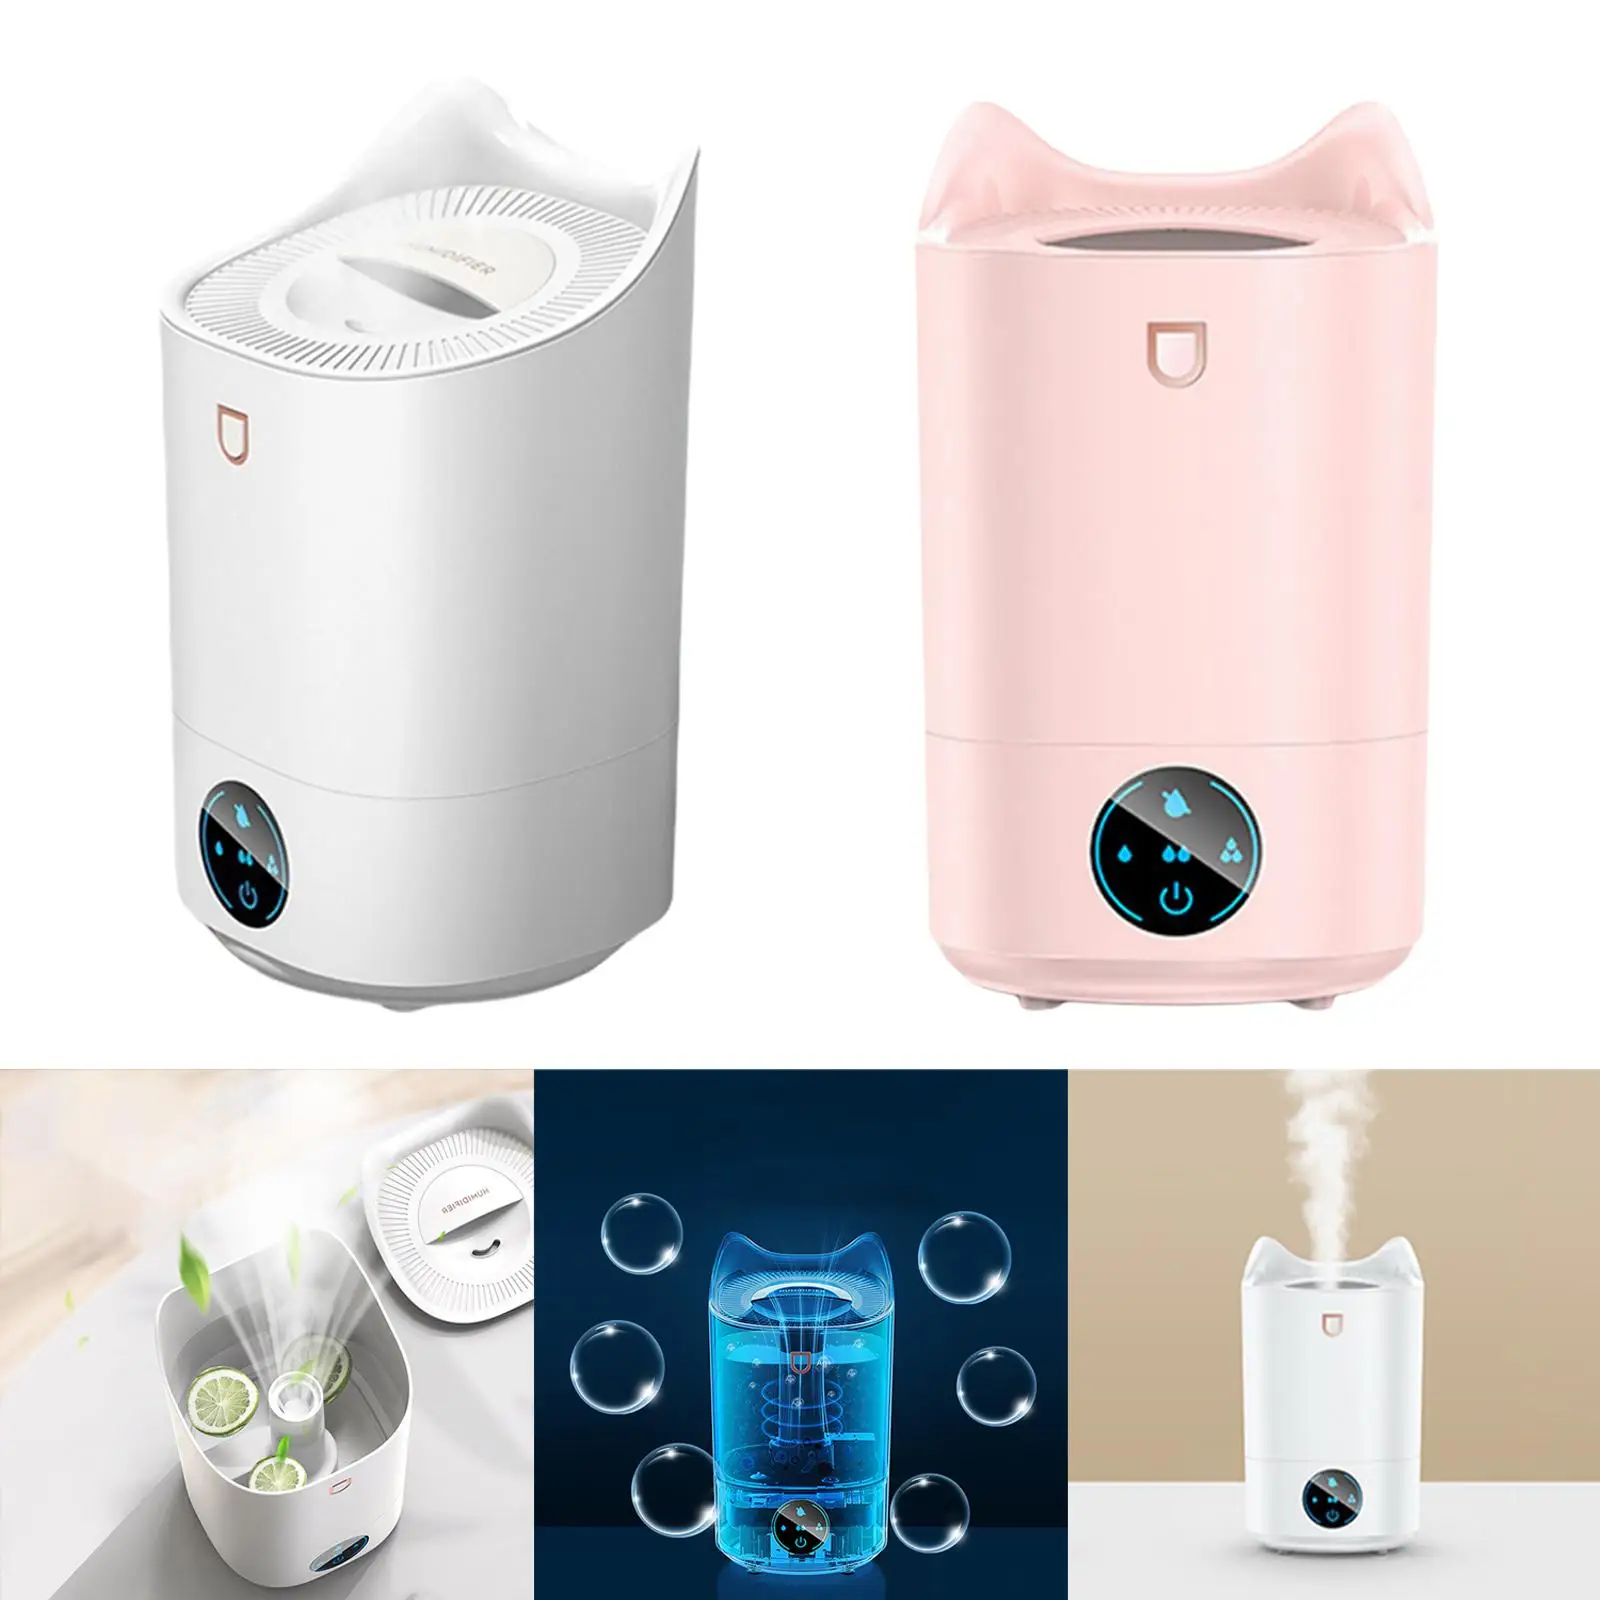 4L Air Humidifier Mute Home Frangrance Essential Oil Diffuser Air Freshener Fogger for Tabletop Home Kids Room SPA Yoga Office